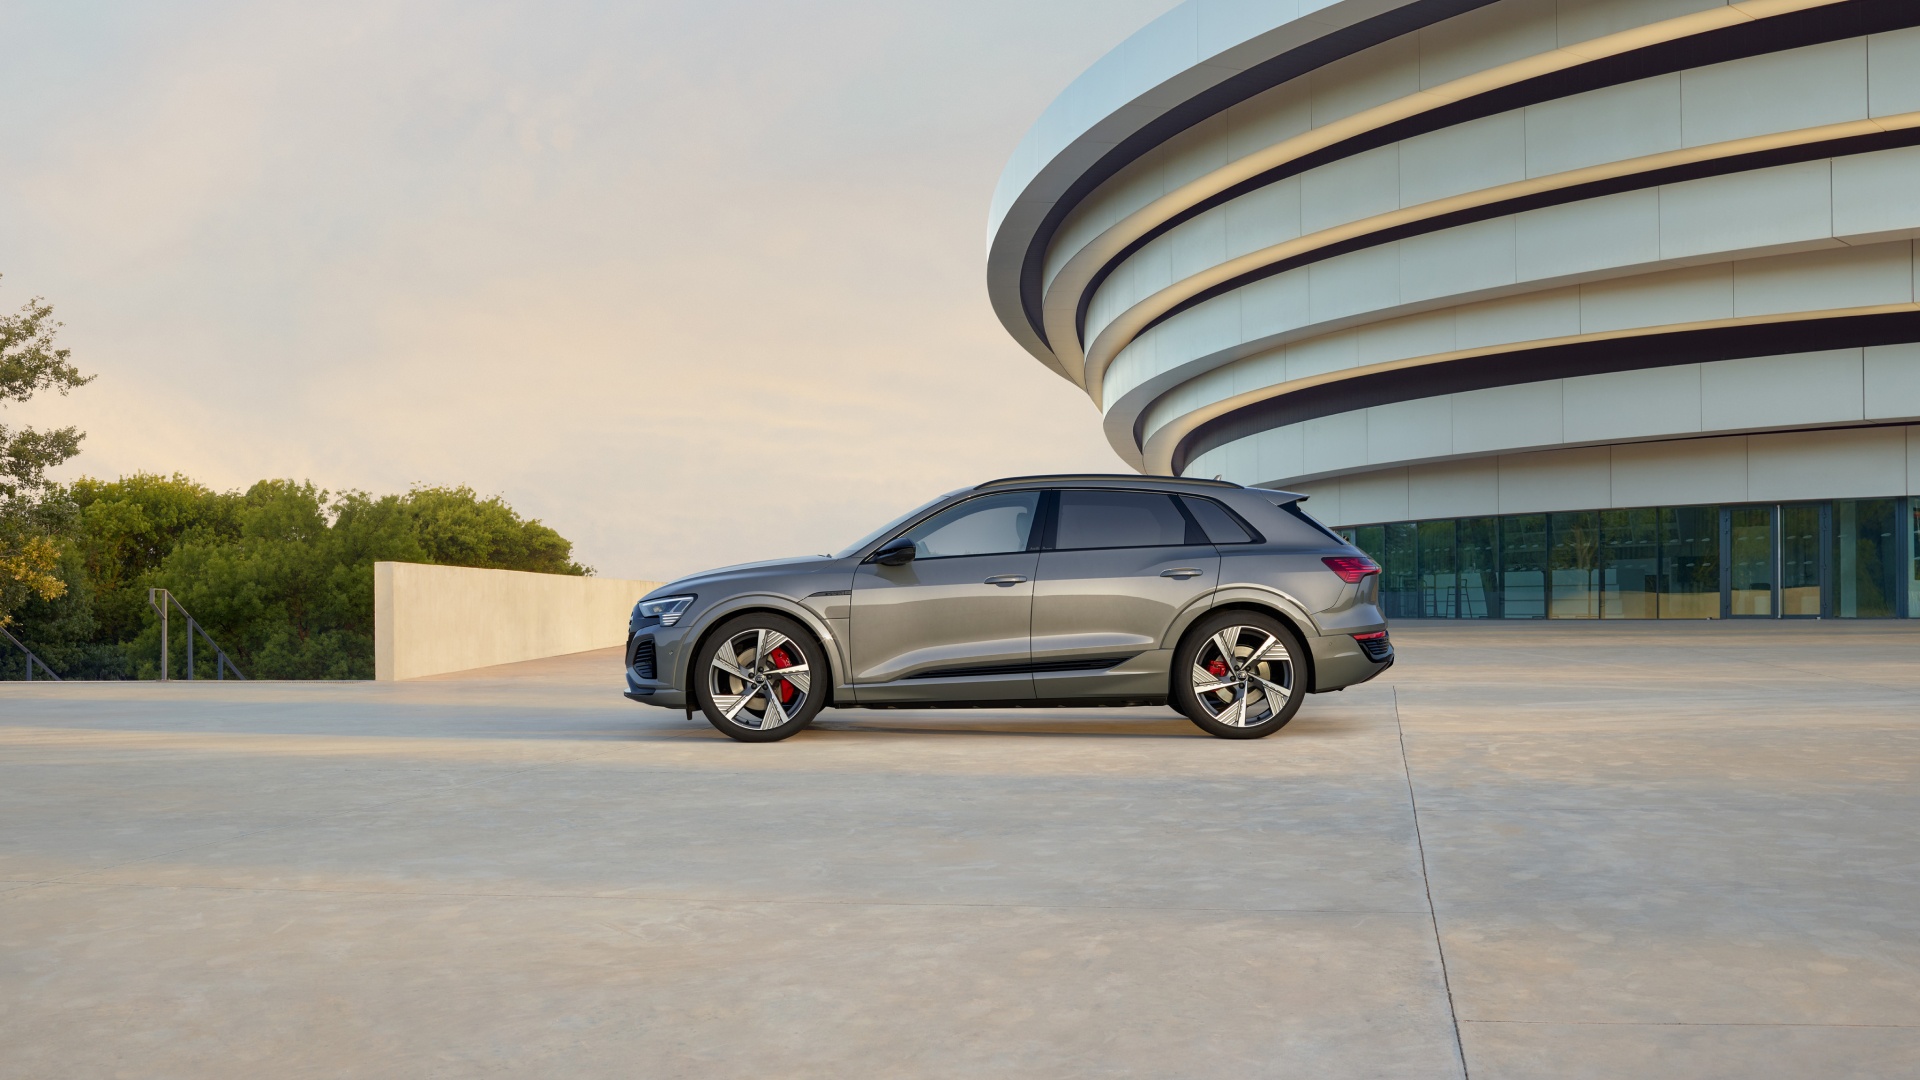 An Audi Q8 e-tron SUV stands in front of a building.